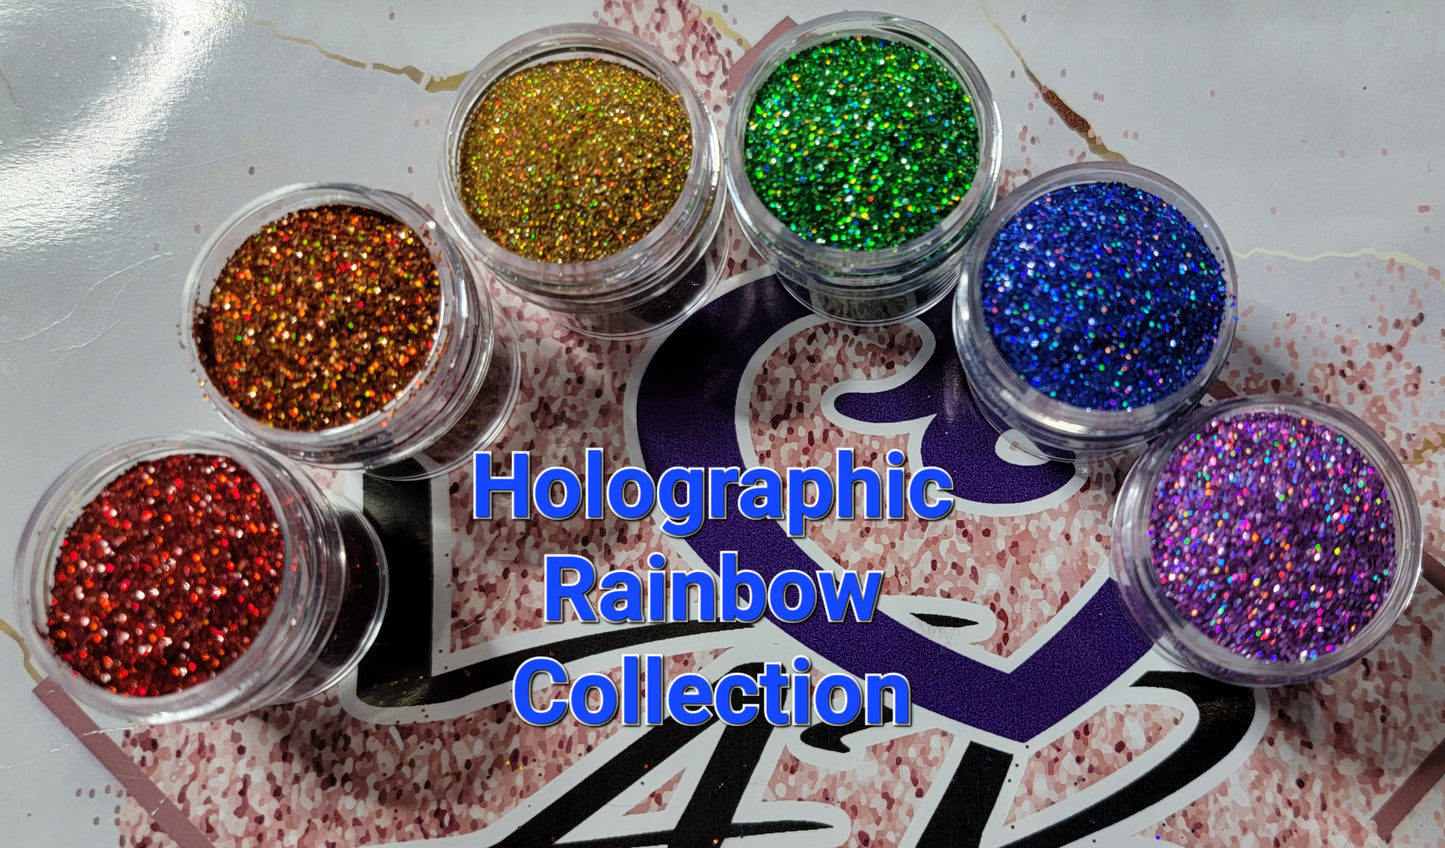 Rainbow Holographic Collection